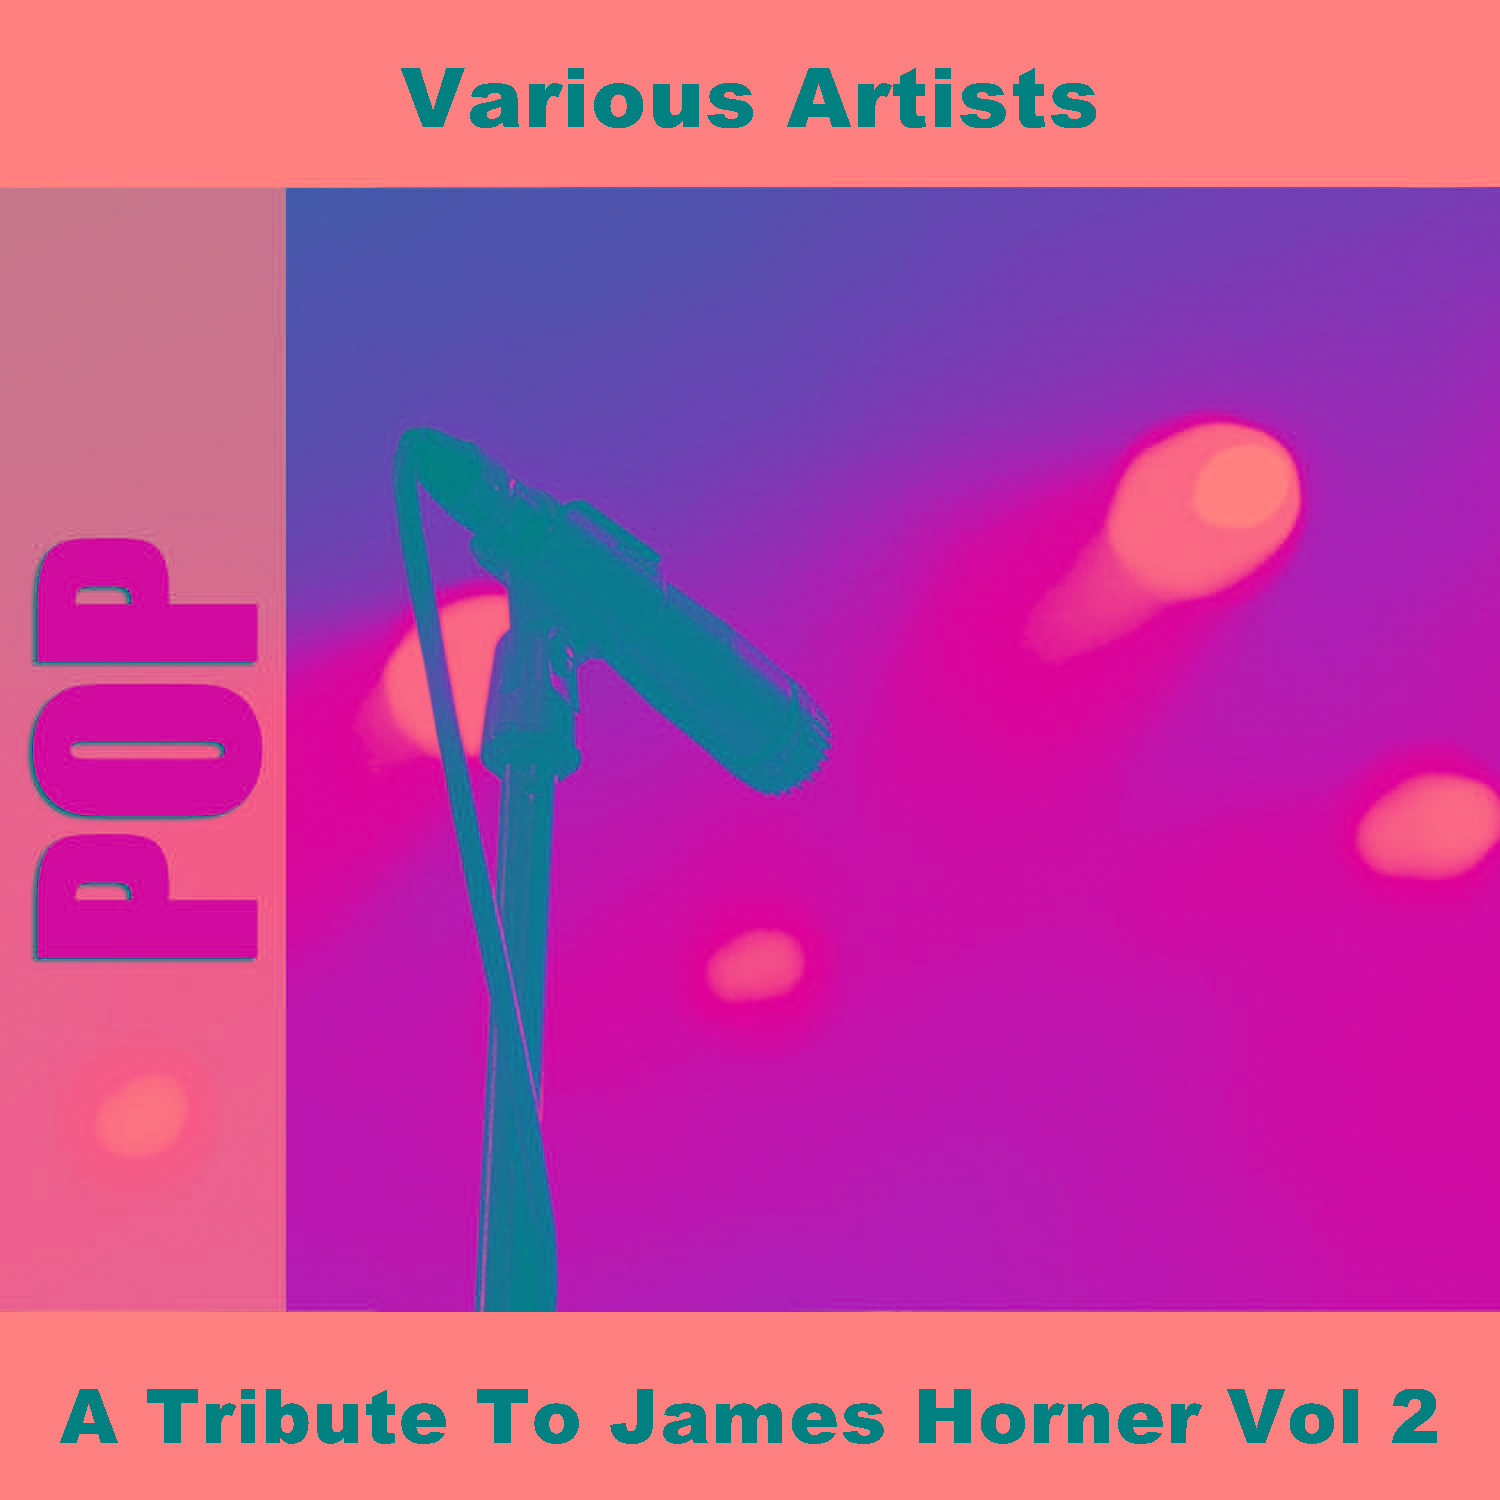 A Tribute To James Horner Vol 2